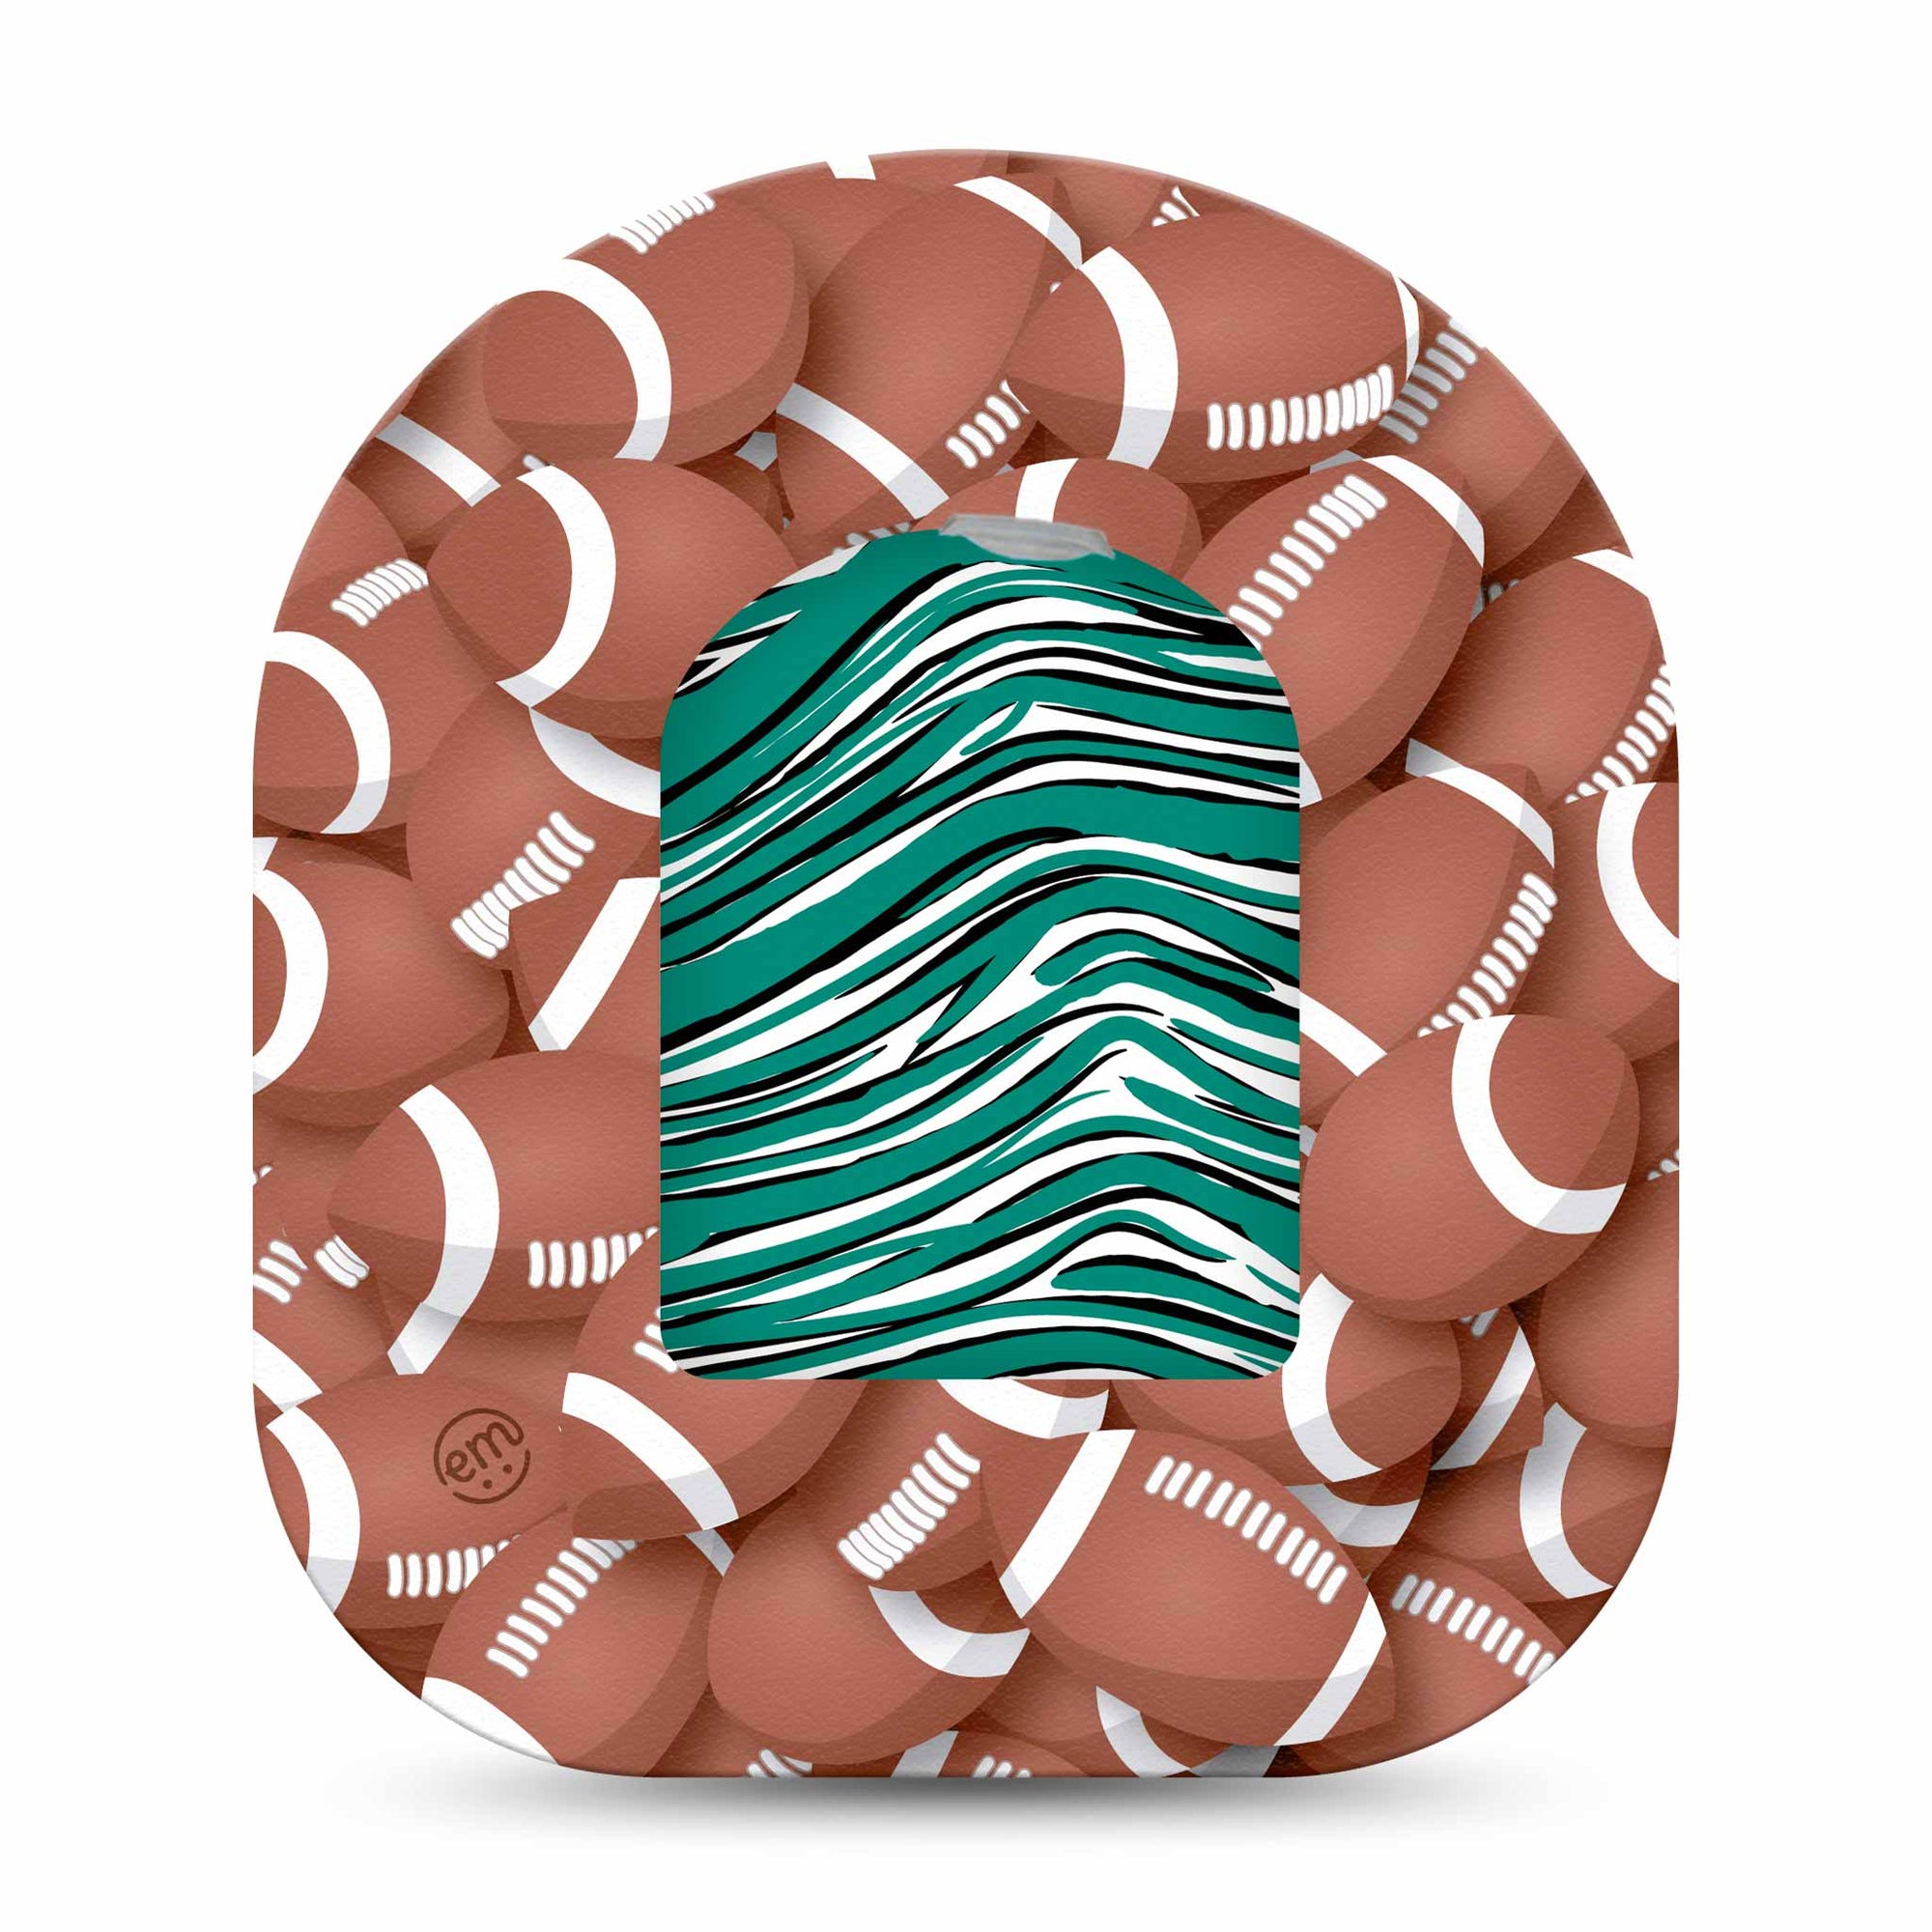 ExpressionMed Green and White Jets Team Spirit Omnipod Sticker and Football Adhesive